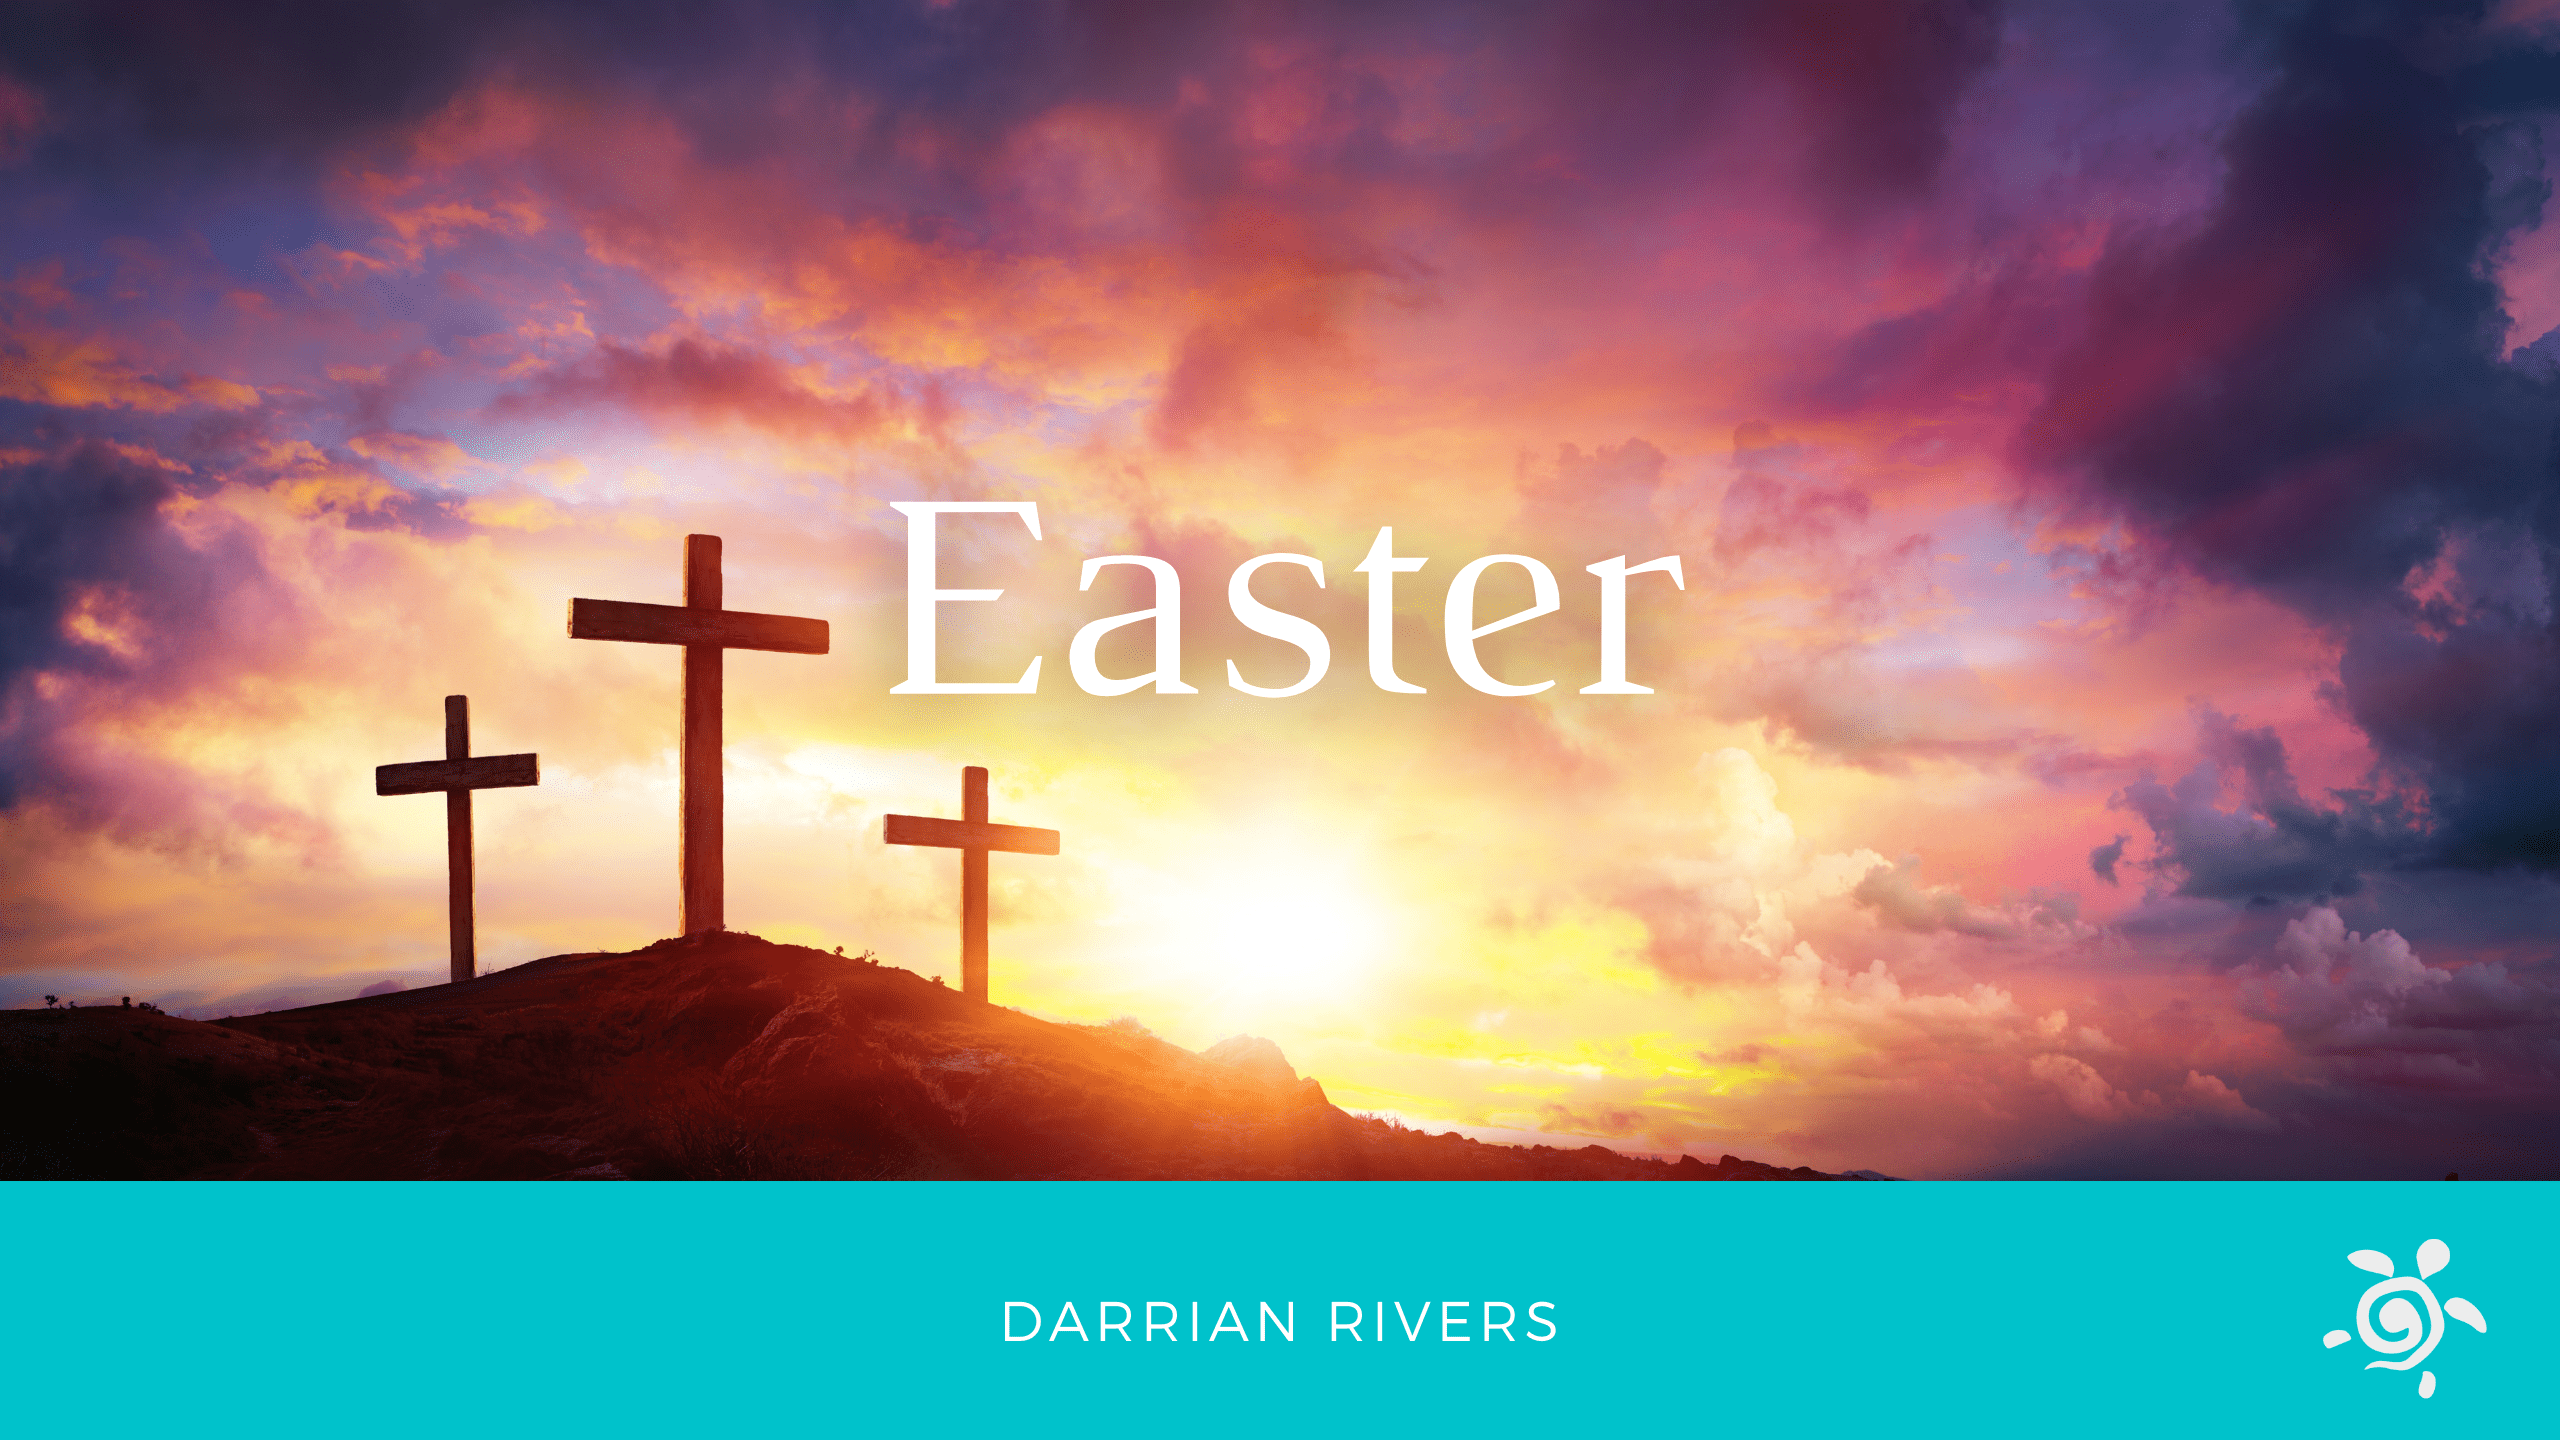 The true meaning of Easter – I am a sinner saved by grace